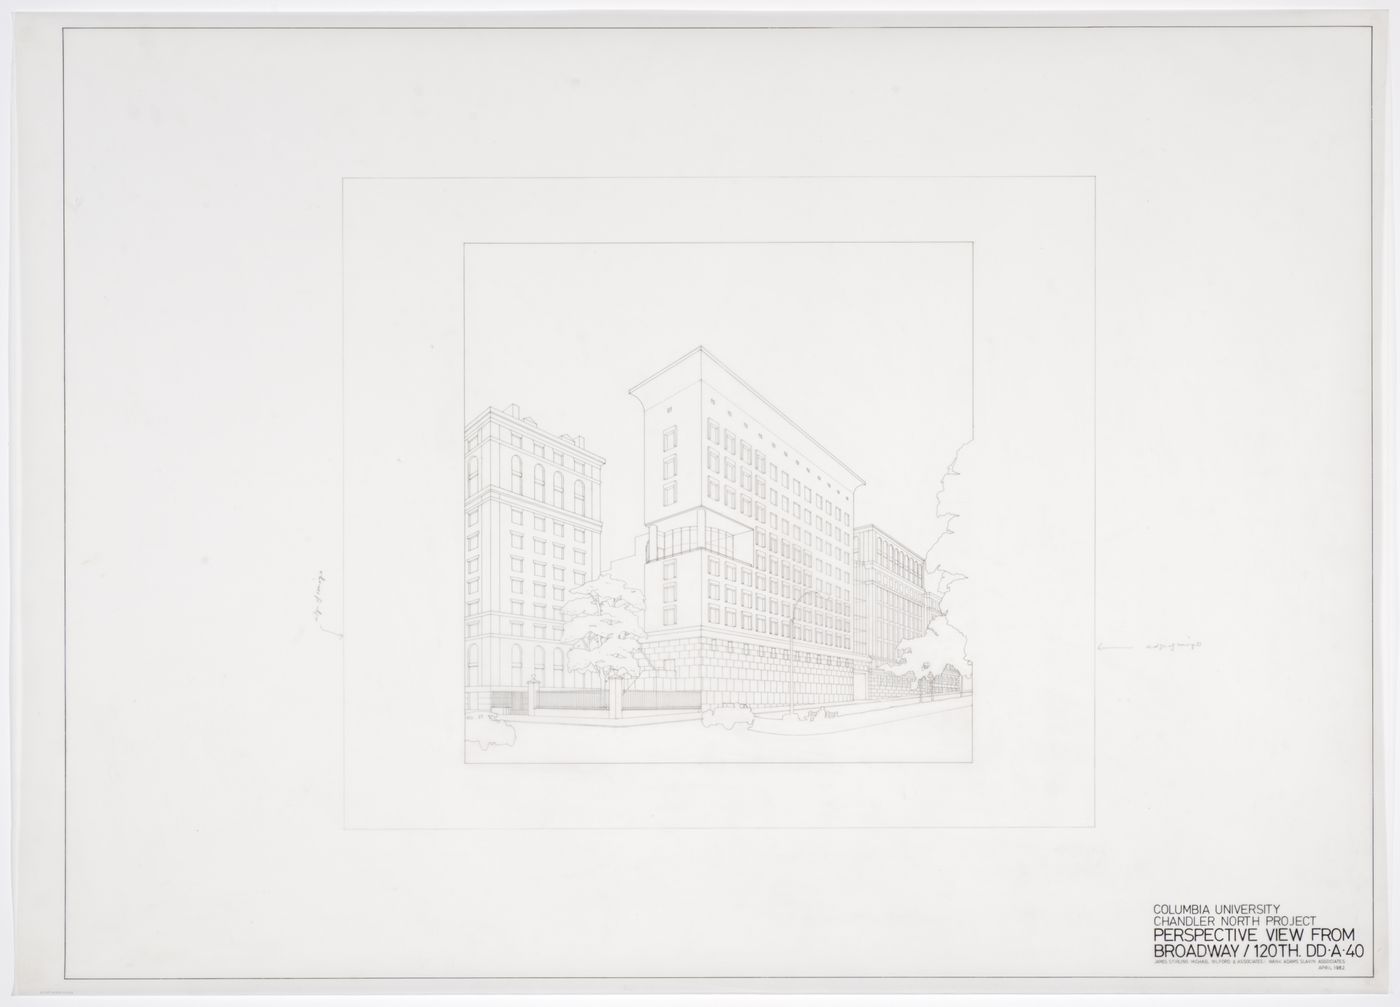 Chandler North Building, Department of Chemistry, Columbia University, New York, New York: perspective view from Broadway and 120th Street